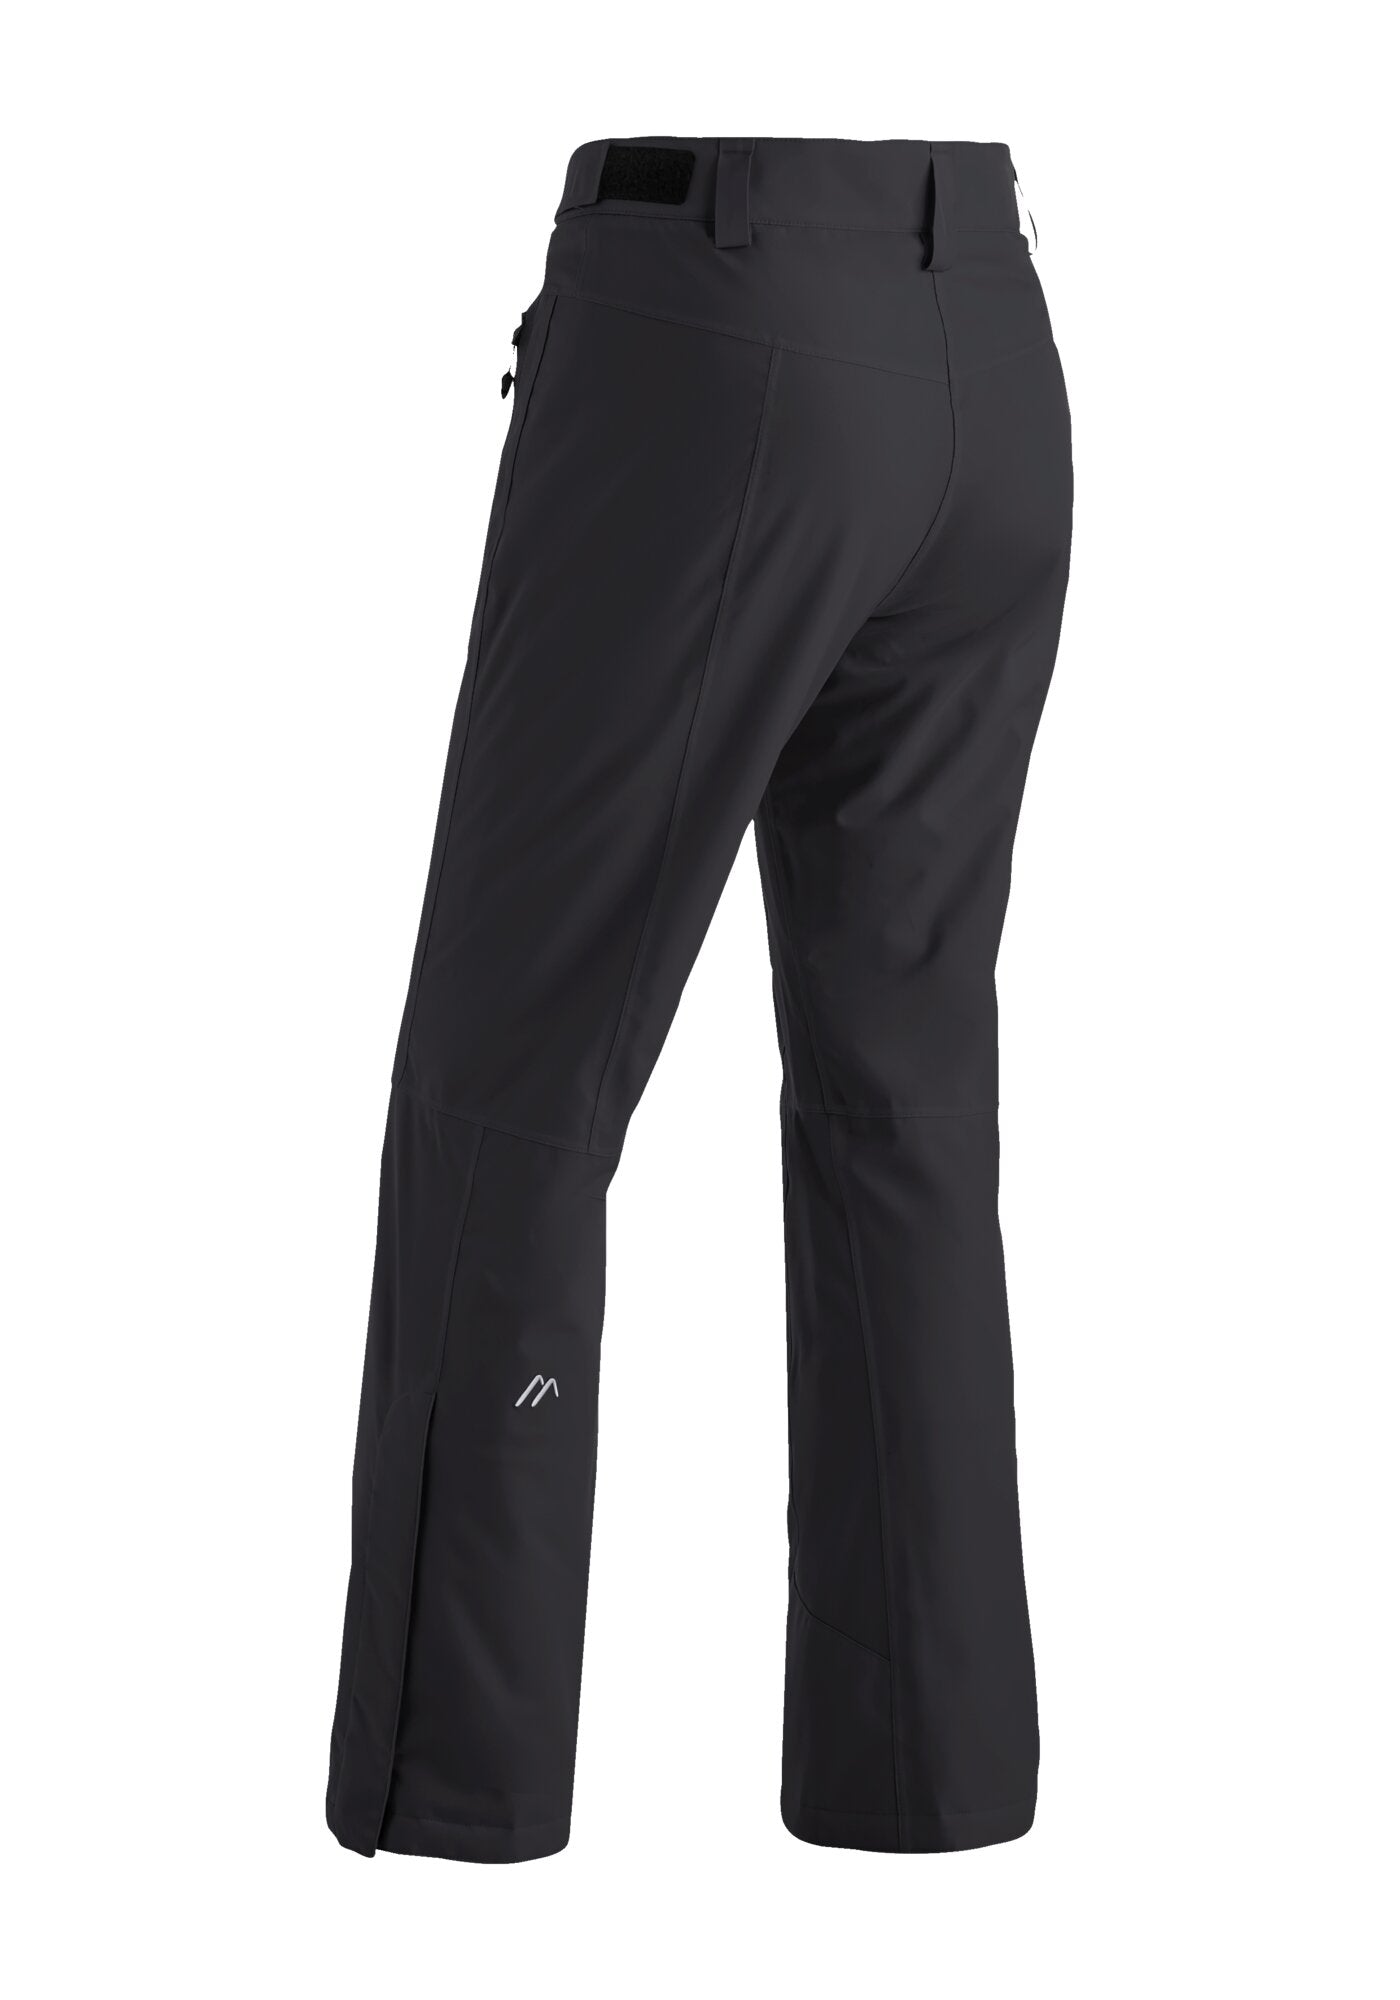 Plus Size Maier Sports Ronka Womens Trousers